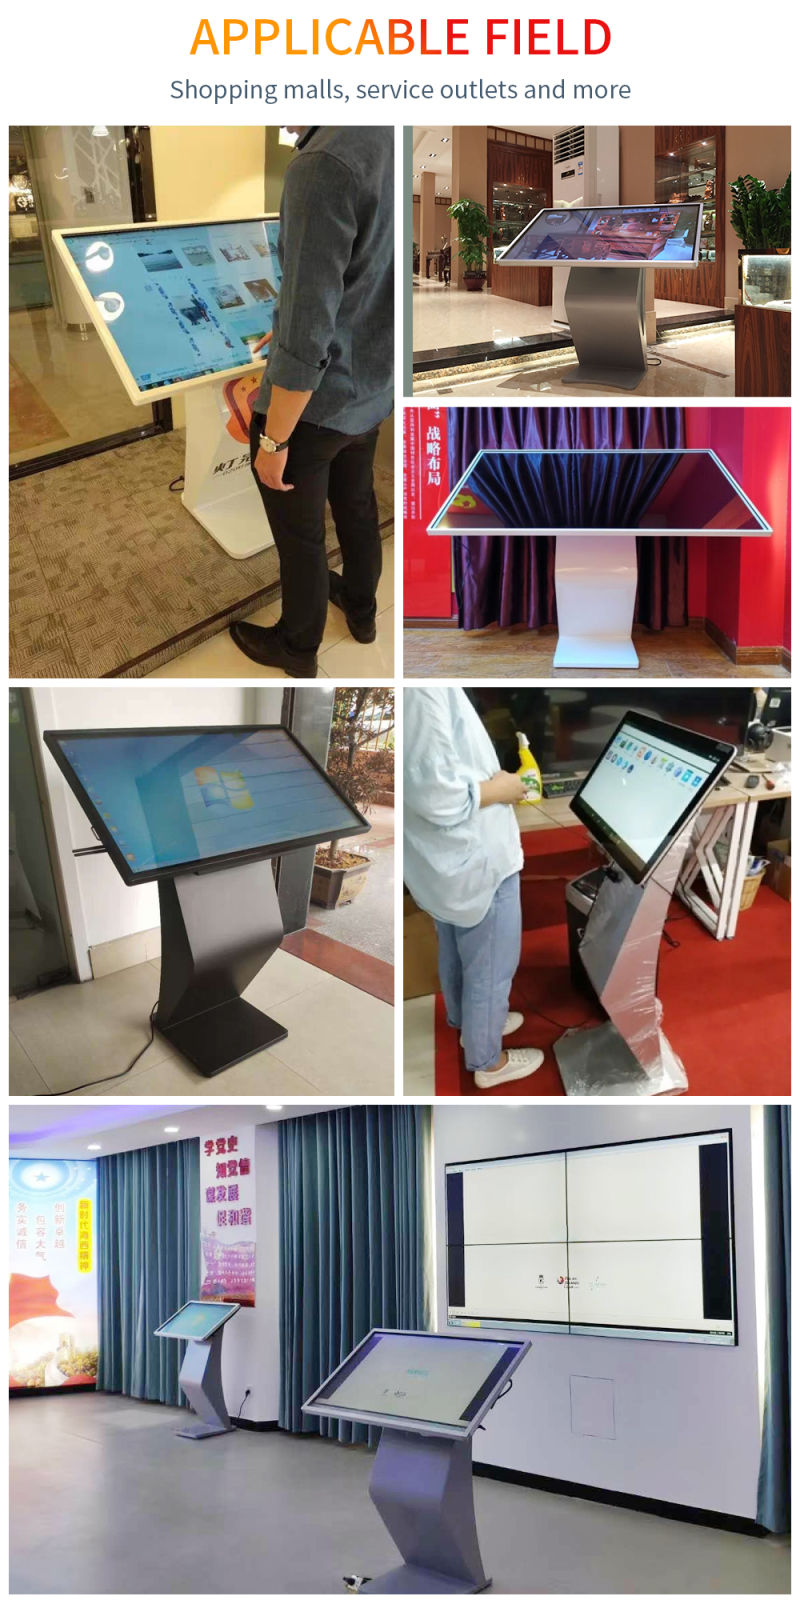 LCD Touch Screen Kiosk Digital Signage Self-Service Terminal Display